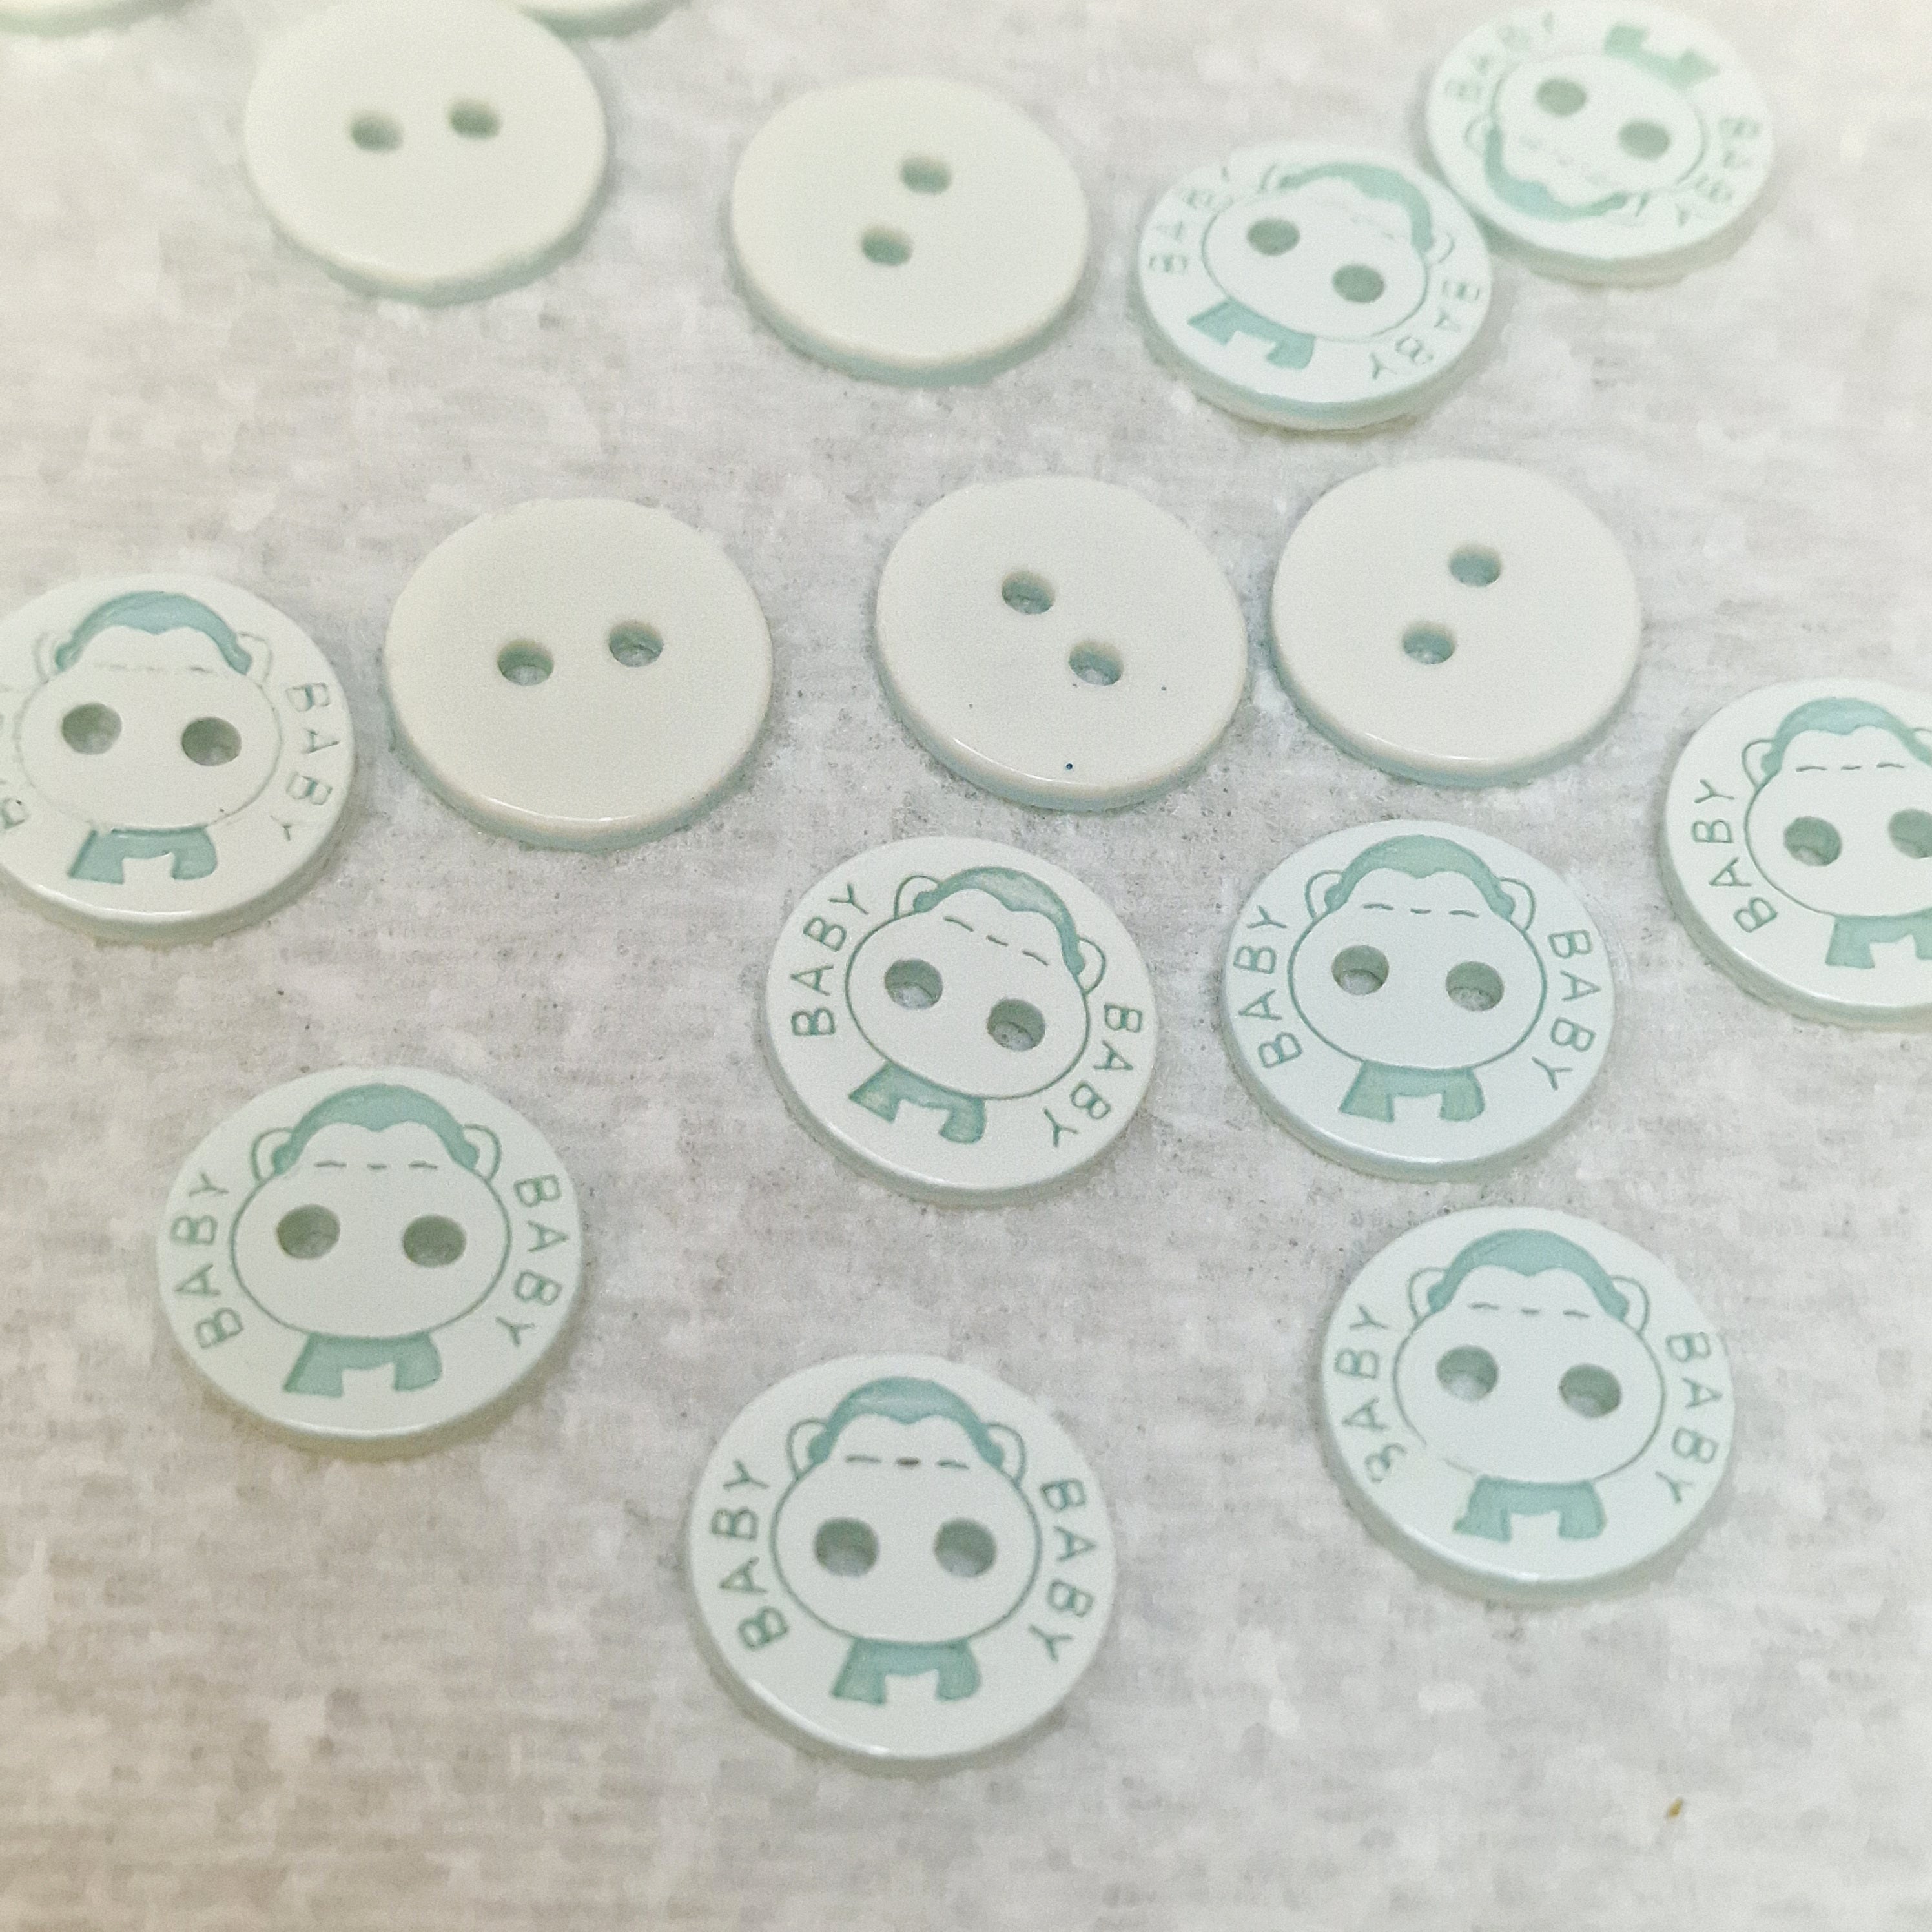 MajorCrafts 48pcs 12.5mm Pale Blue Green & White 'Baby' Printed 2 Holes Small Round Resin Sewing Buttons